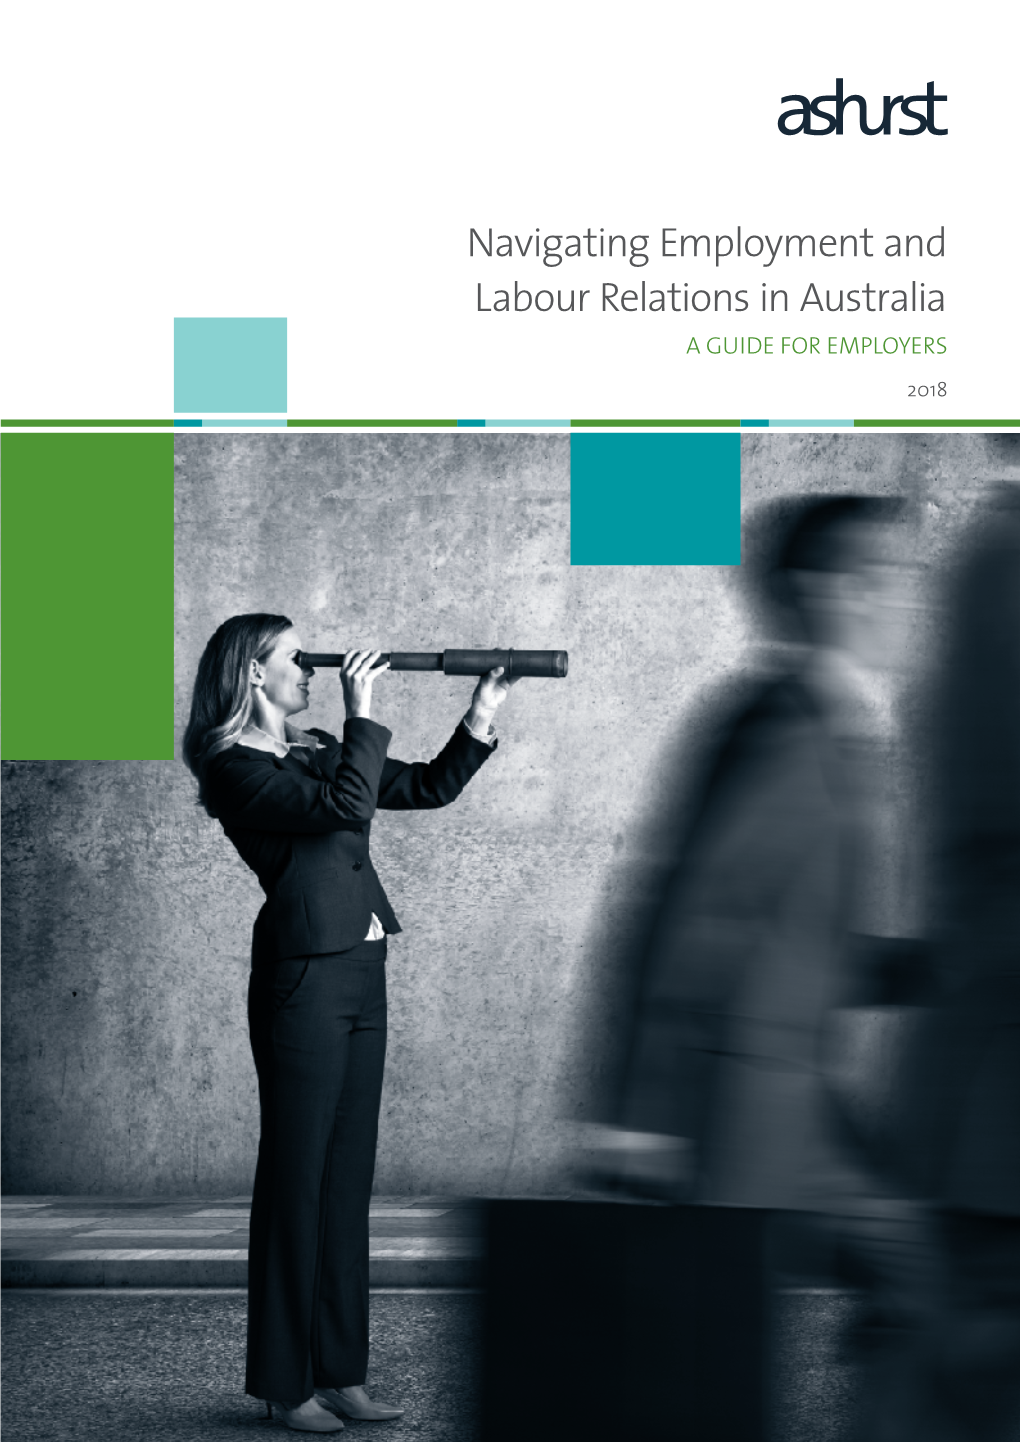 Navigating Employment and Labour Relations in Australia a GUIDE for EMPLOYERS